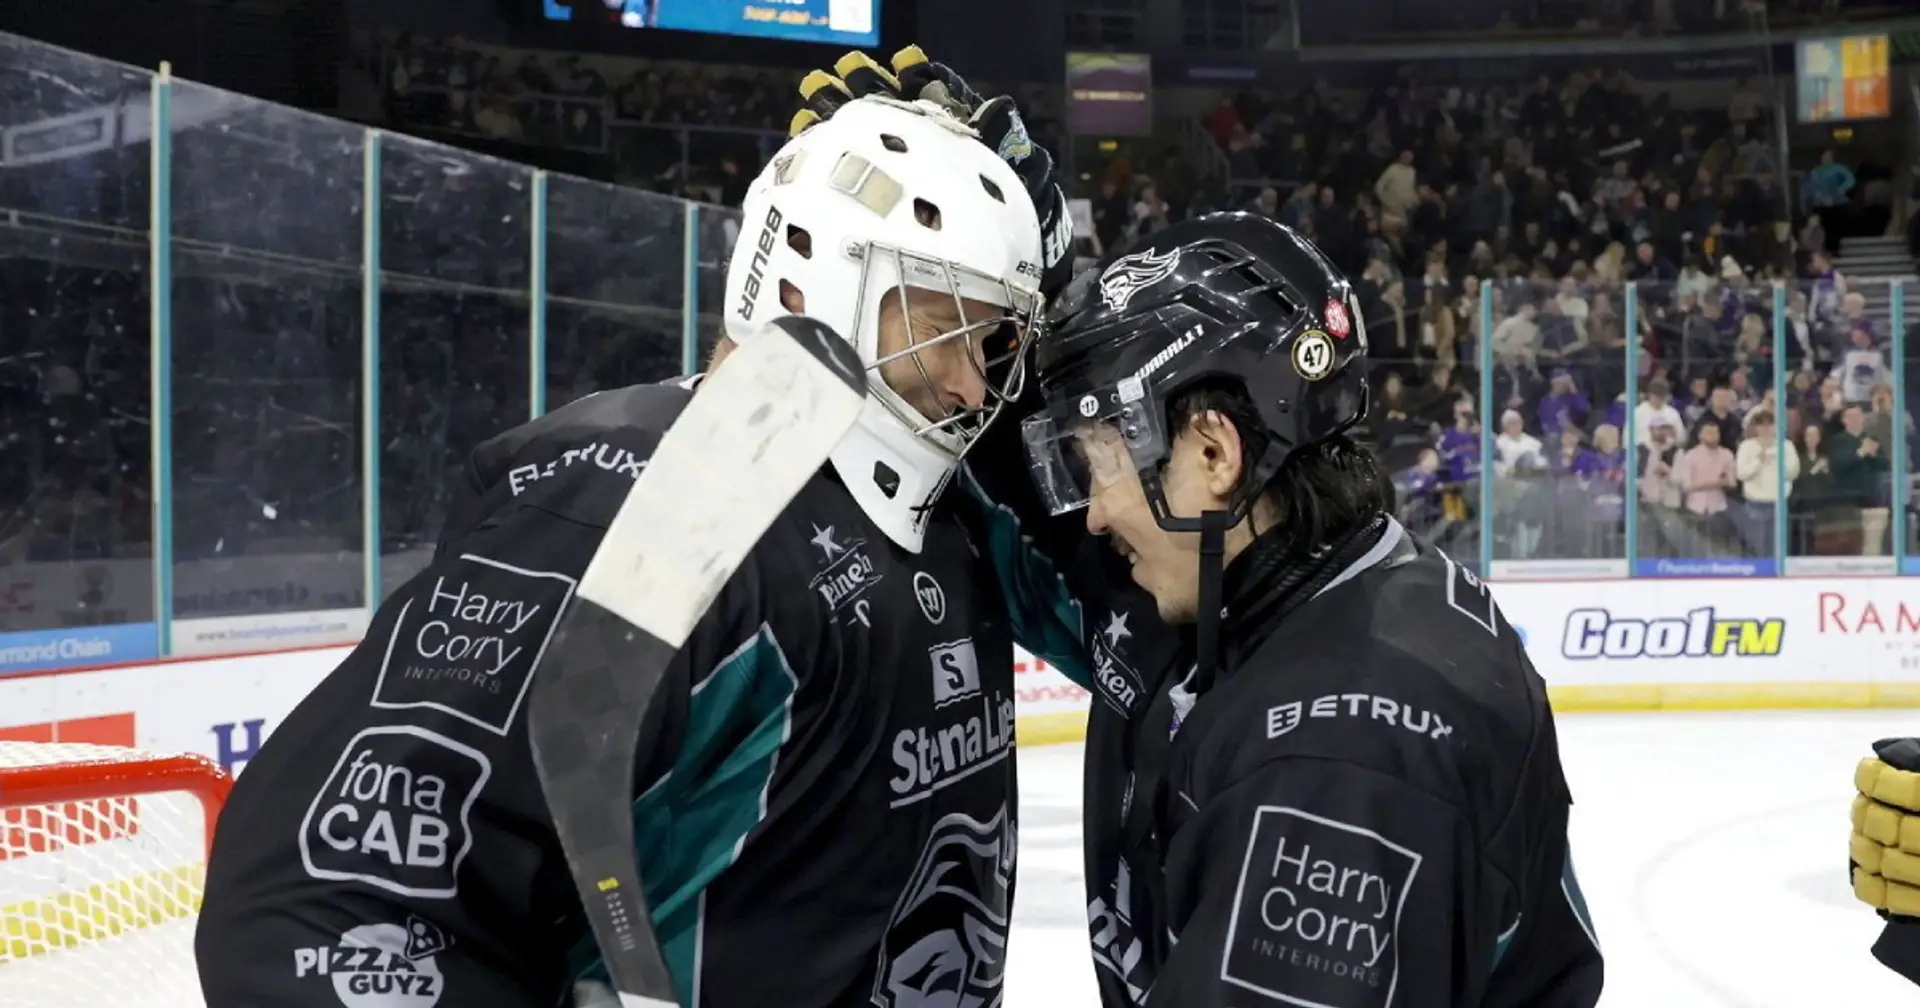 Petr Cech makes debut in top-tier British ice hockey league & 2 more under-radar stories